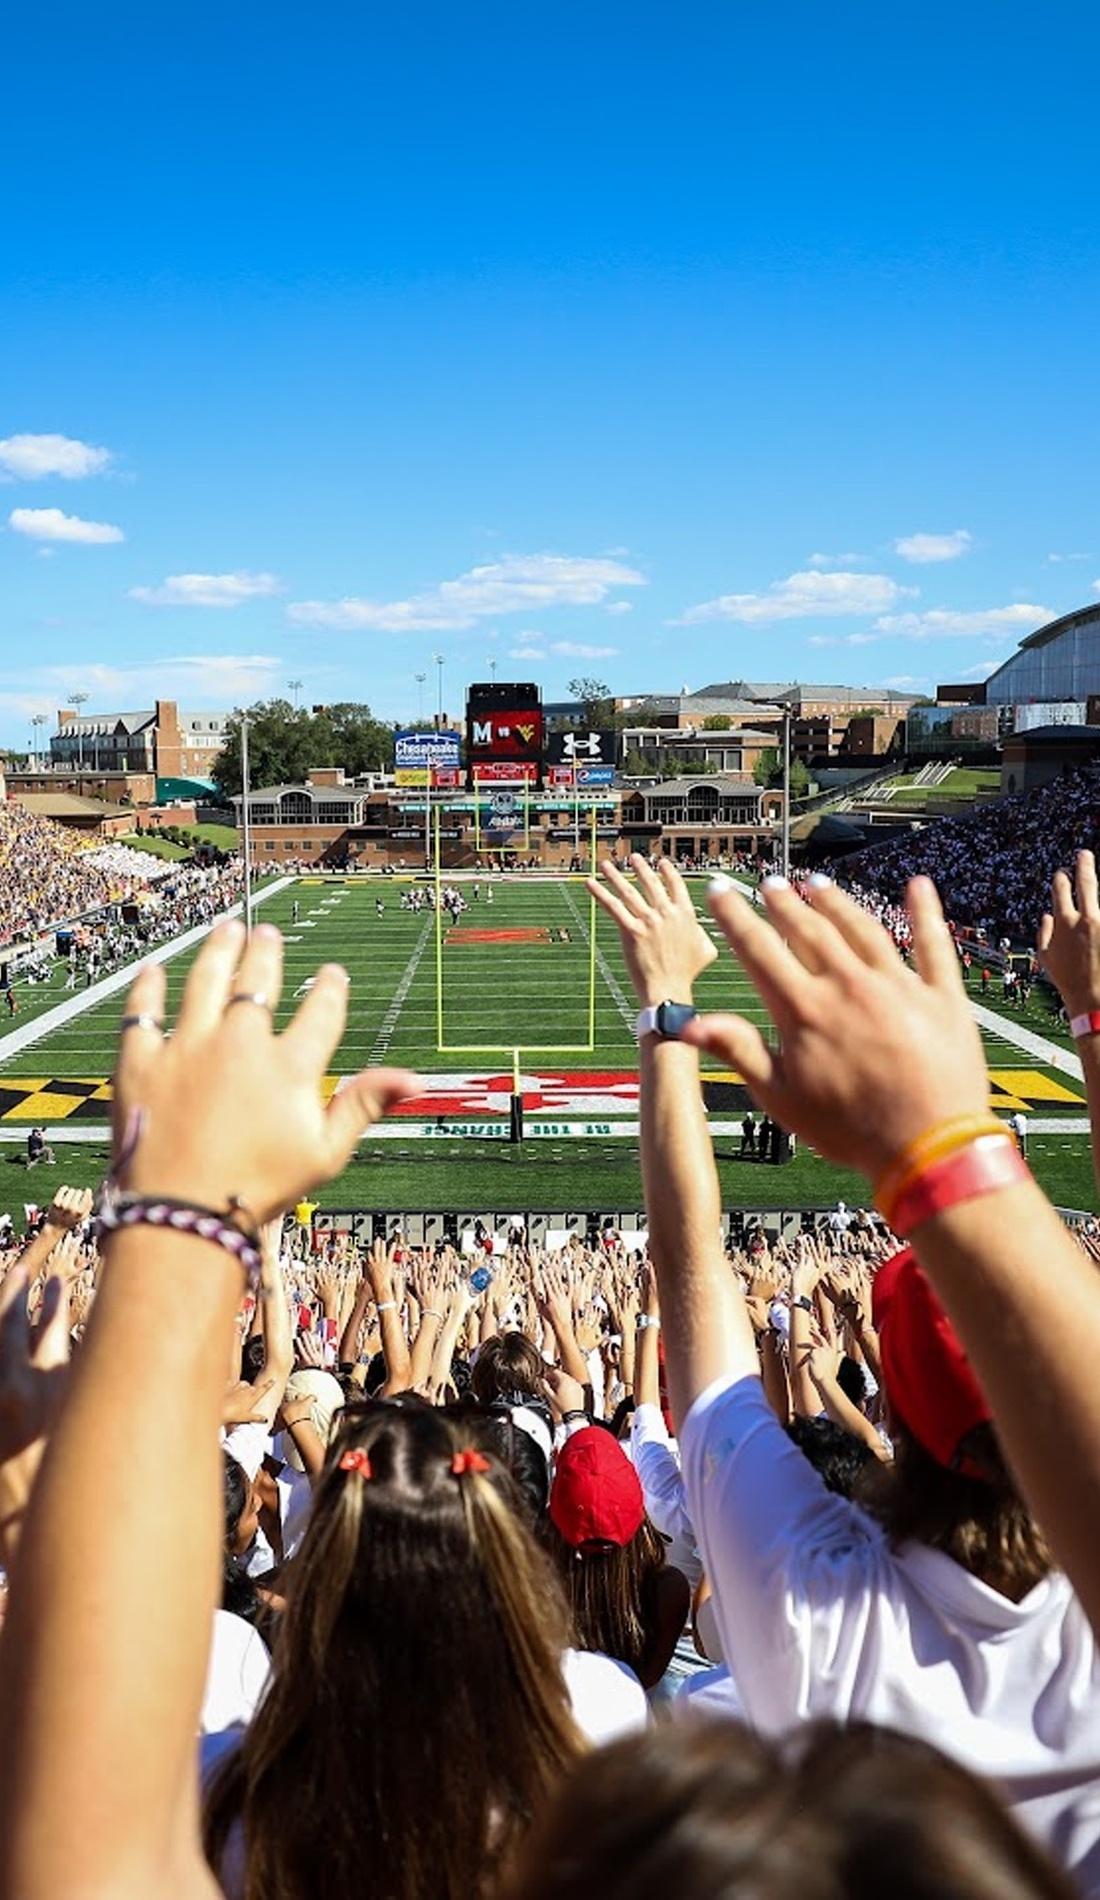 University of Maryland's football stadium to change name in October